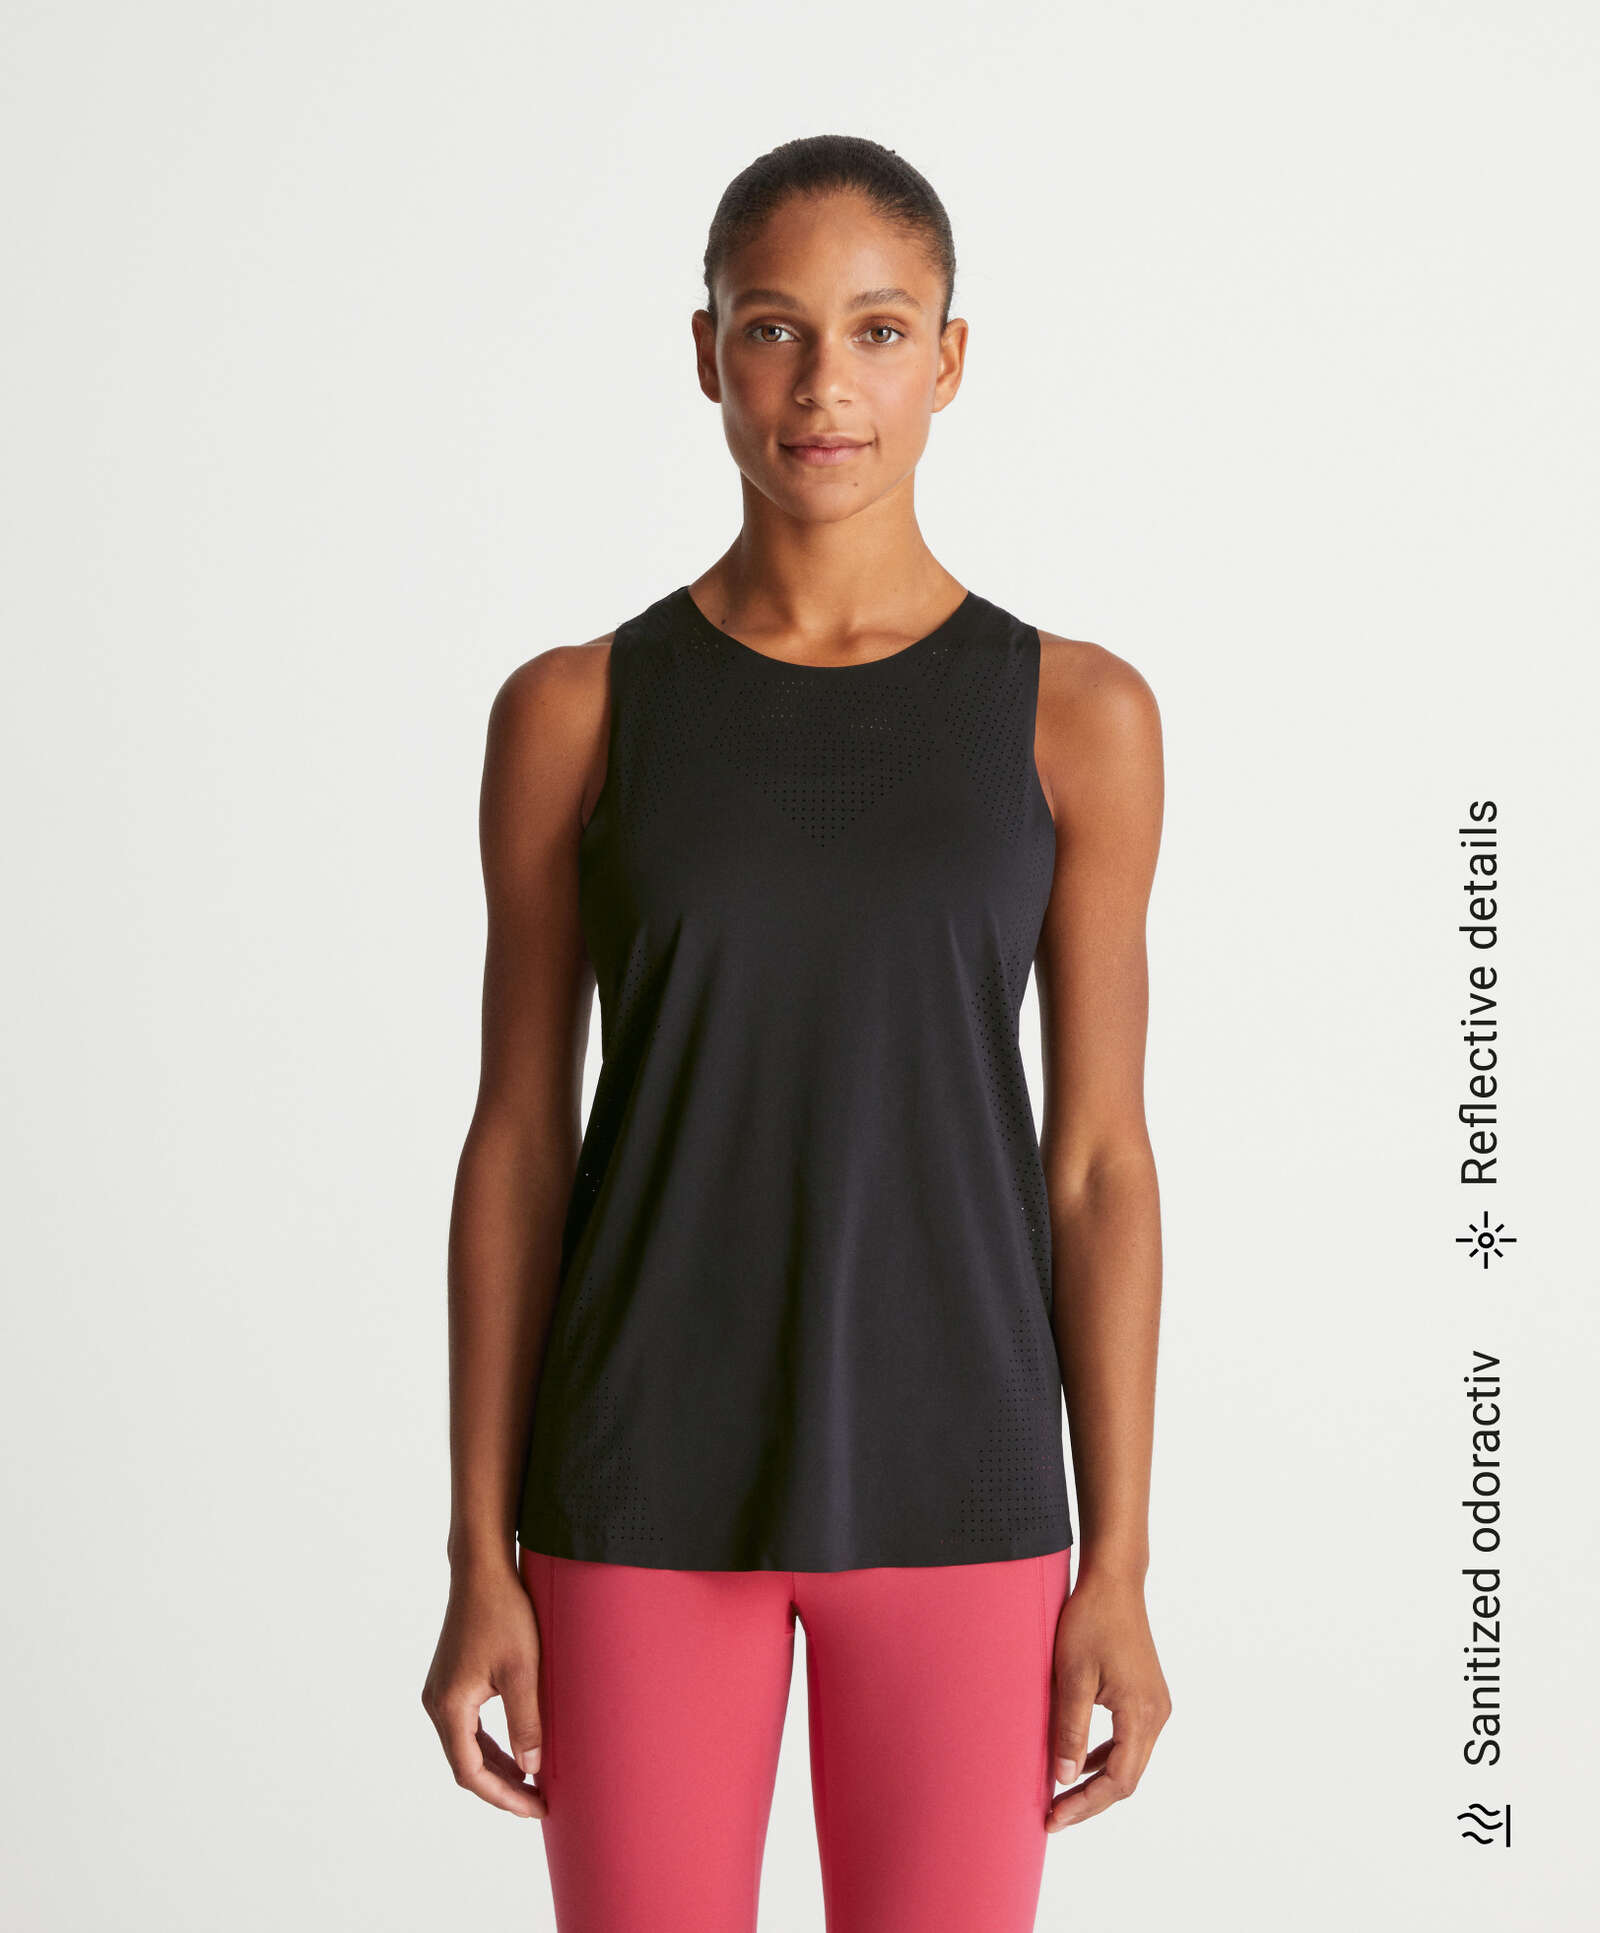 Microperforated technical sleeveless T-shirt